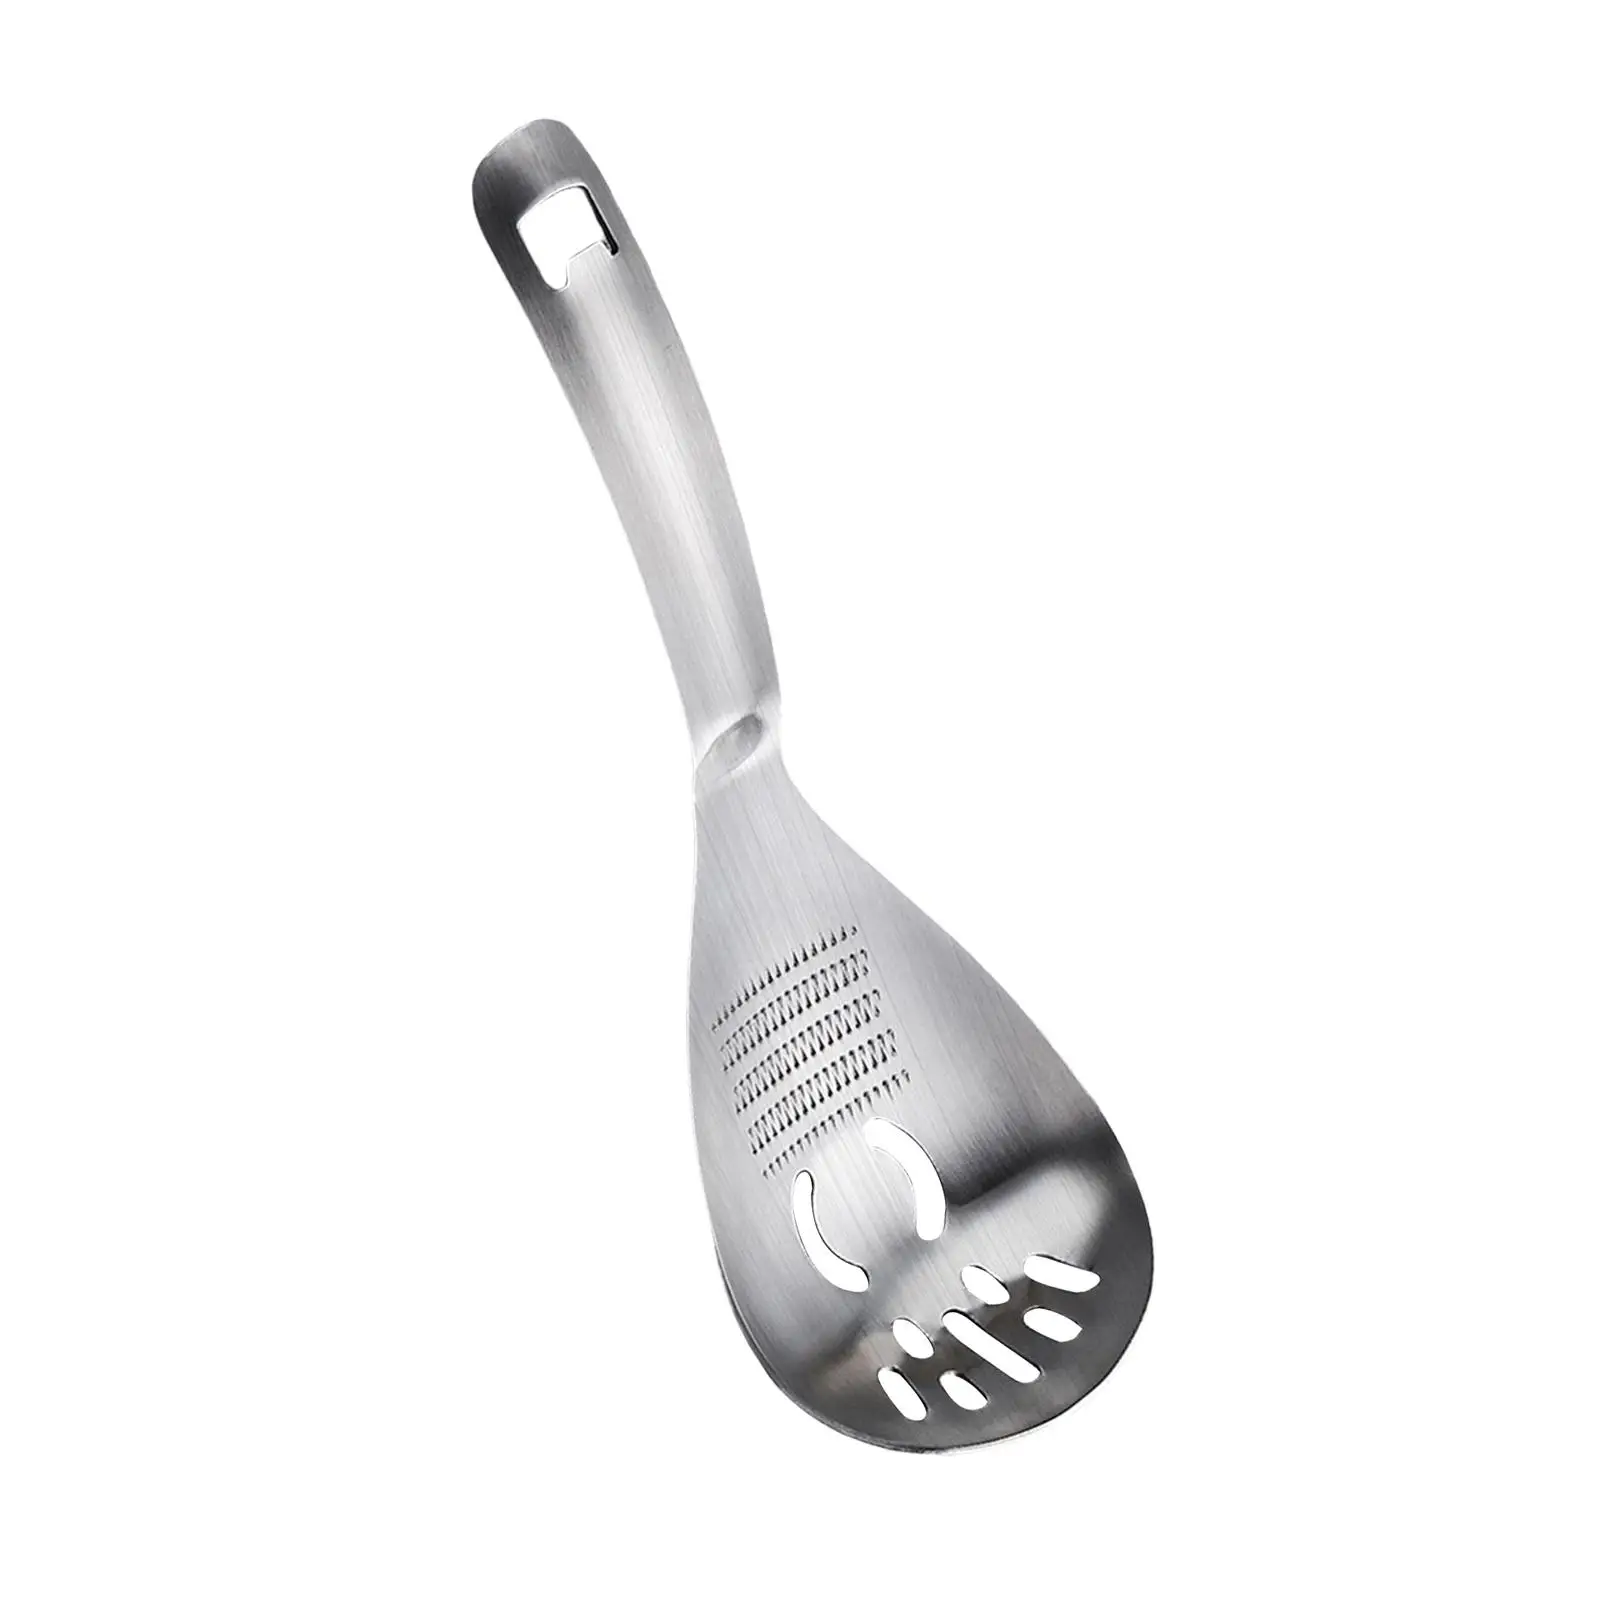 Versatile 304 Stainless Steel Kitchen Slotted Serving Spoon Handle with Hole